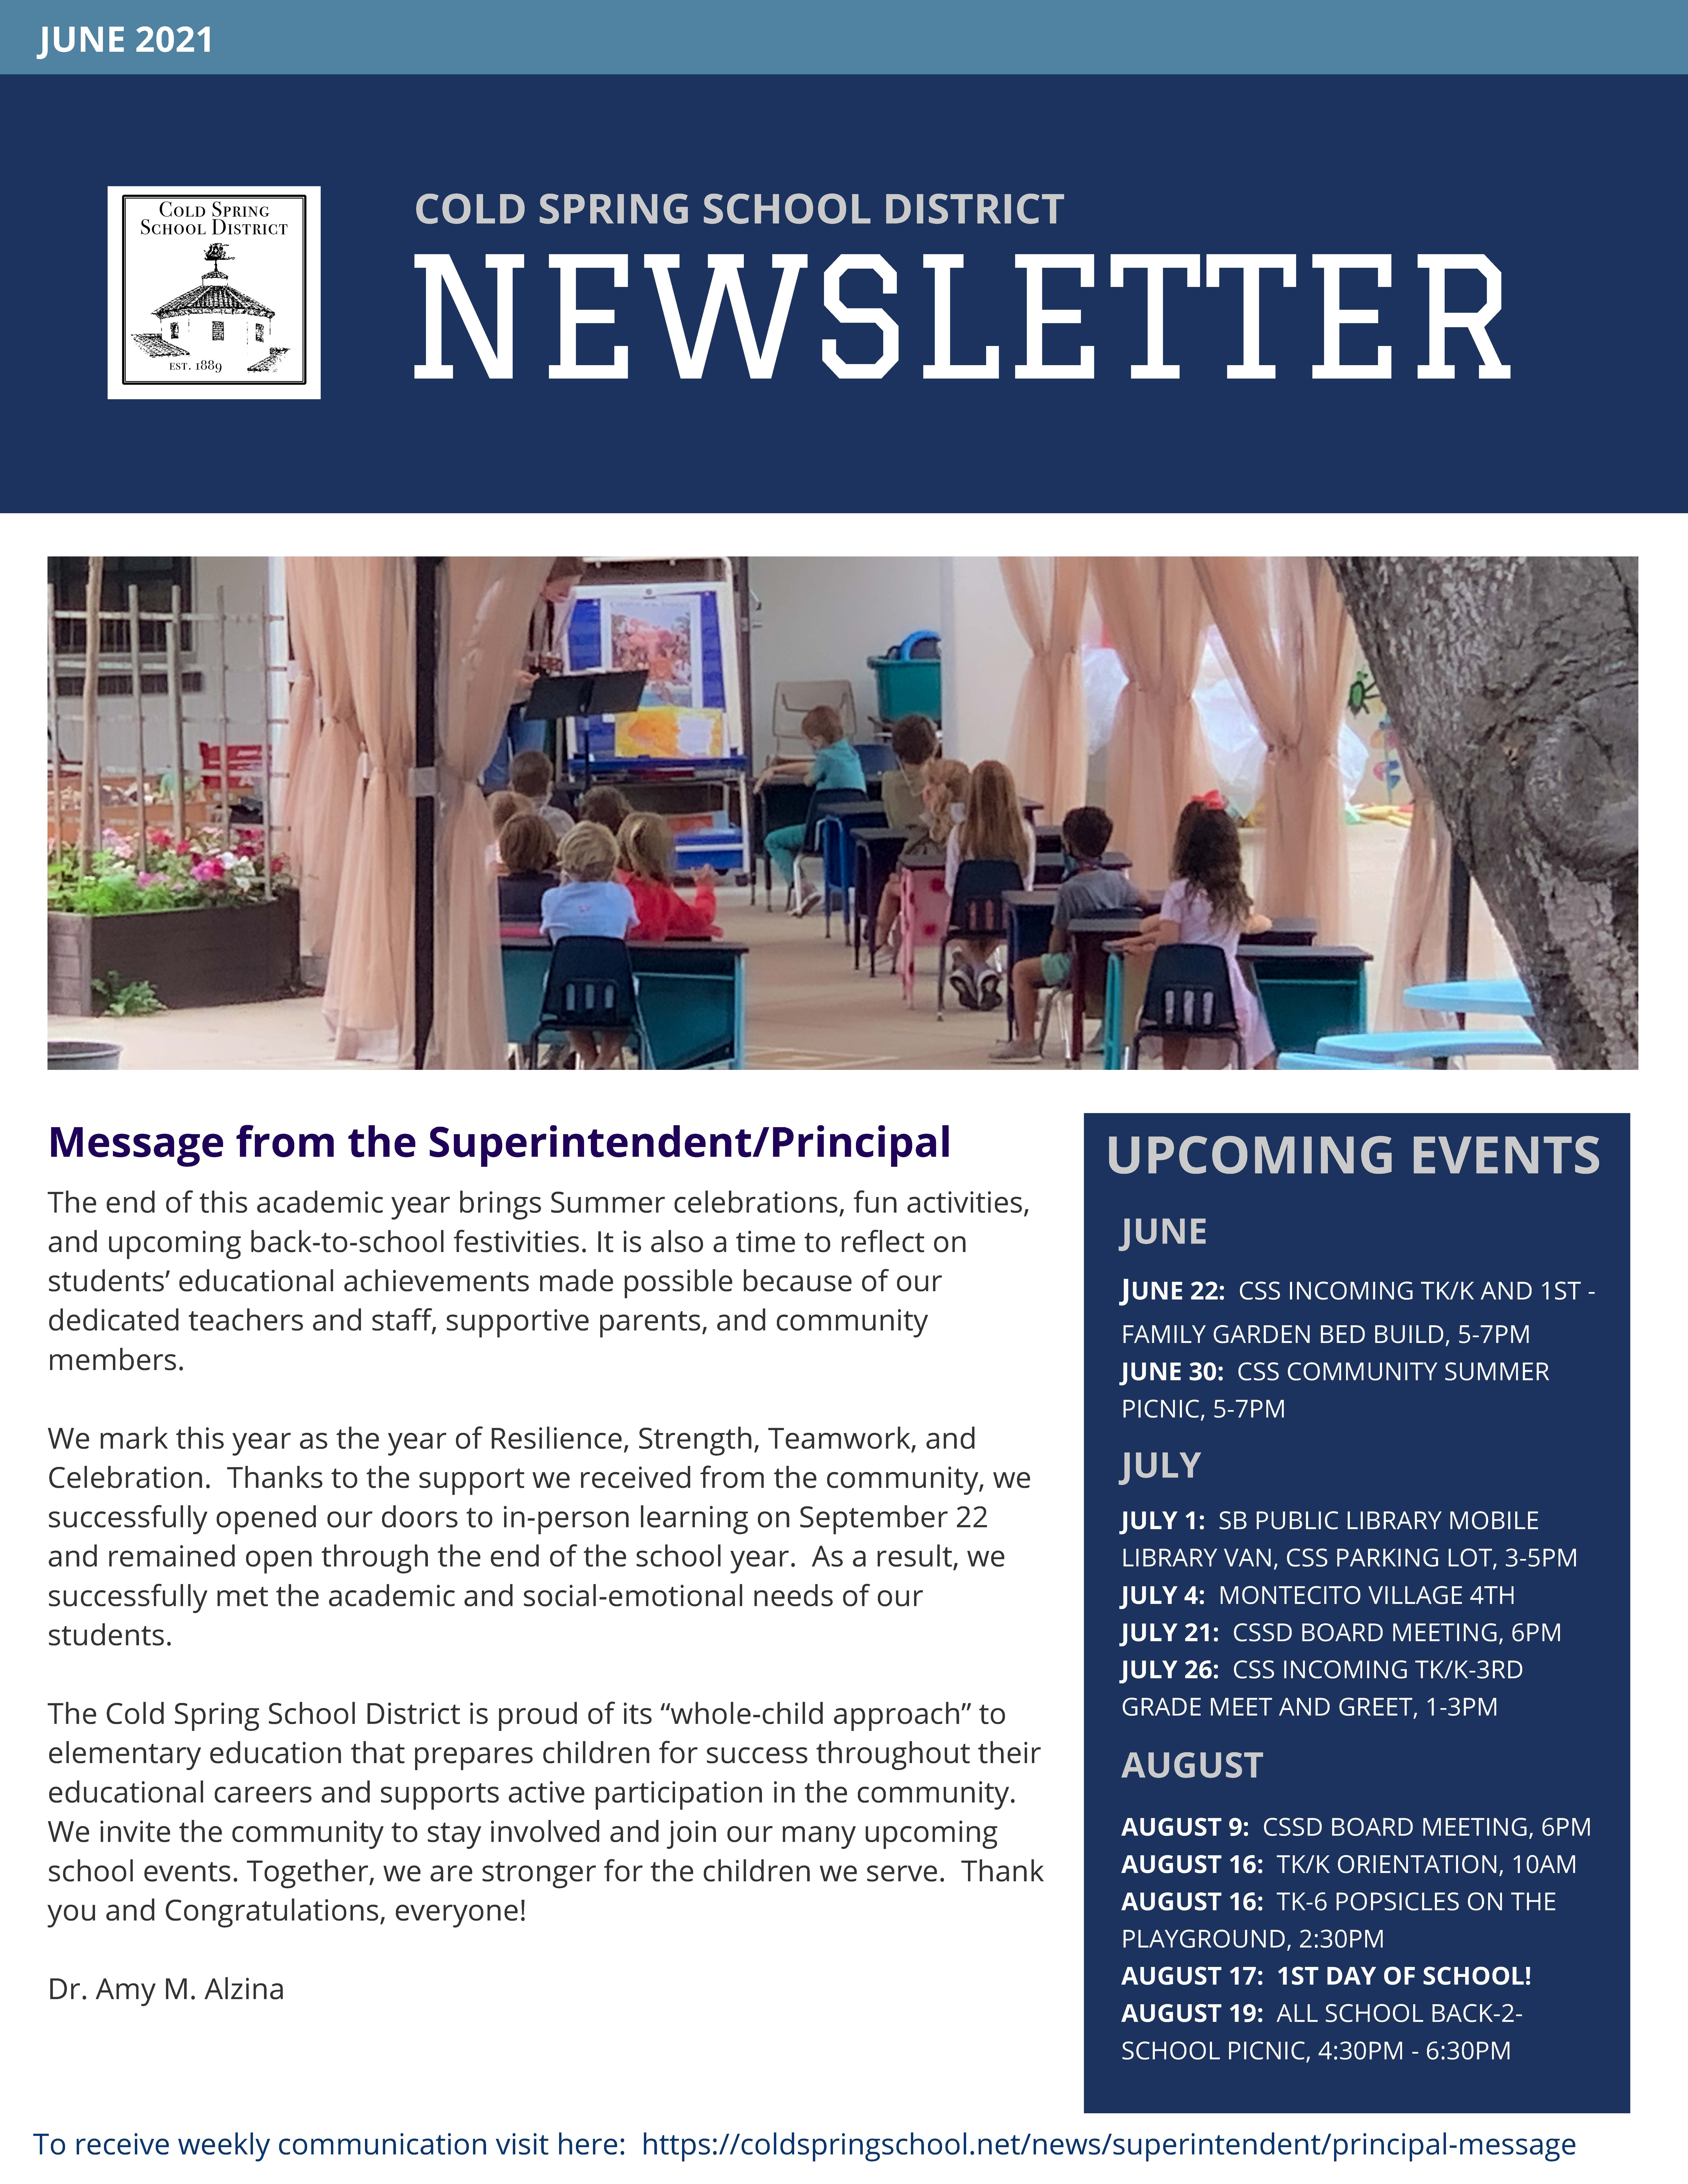 community newsletter with image of students